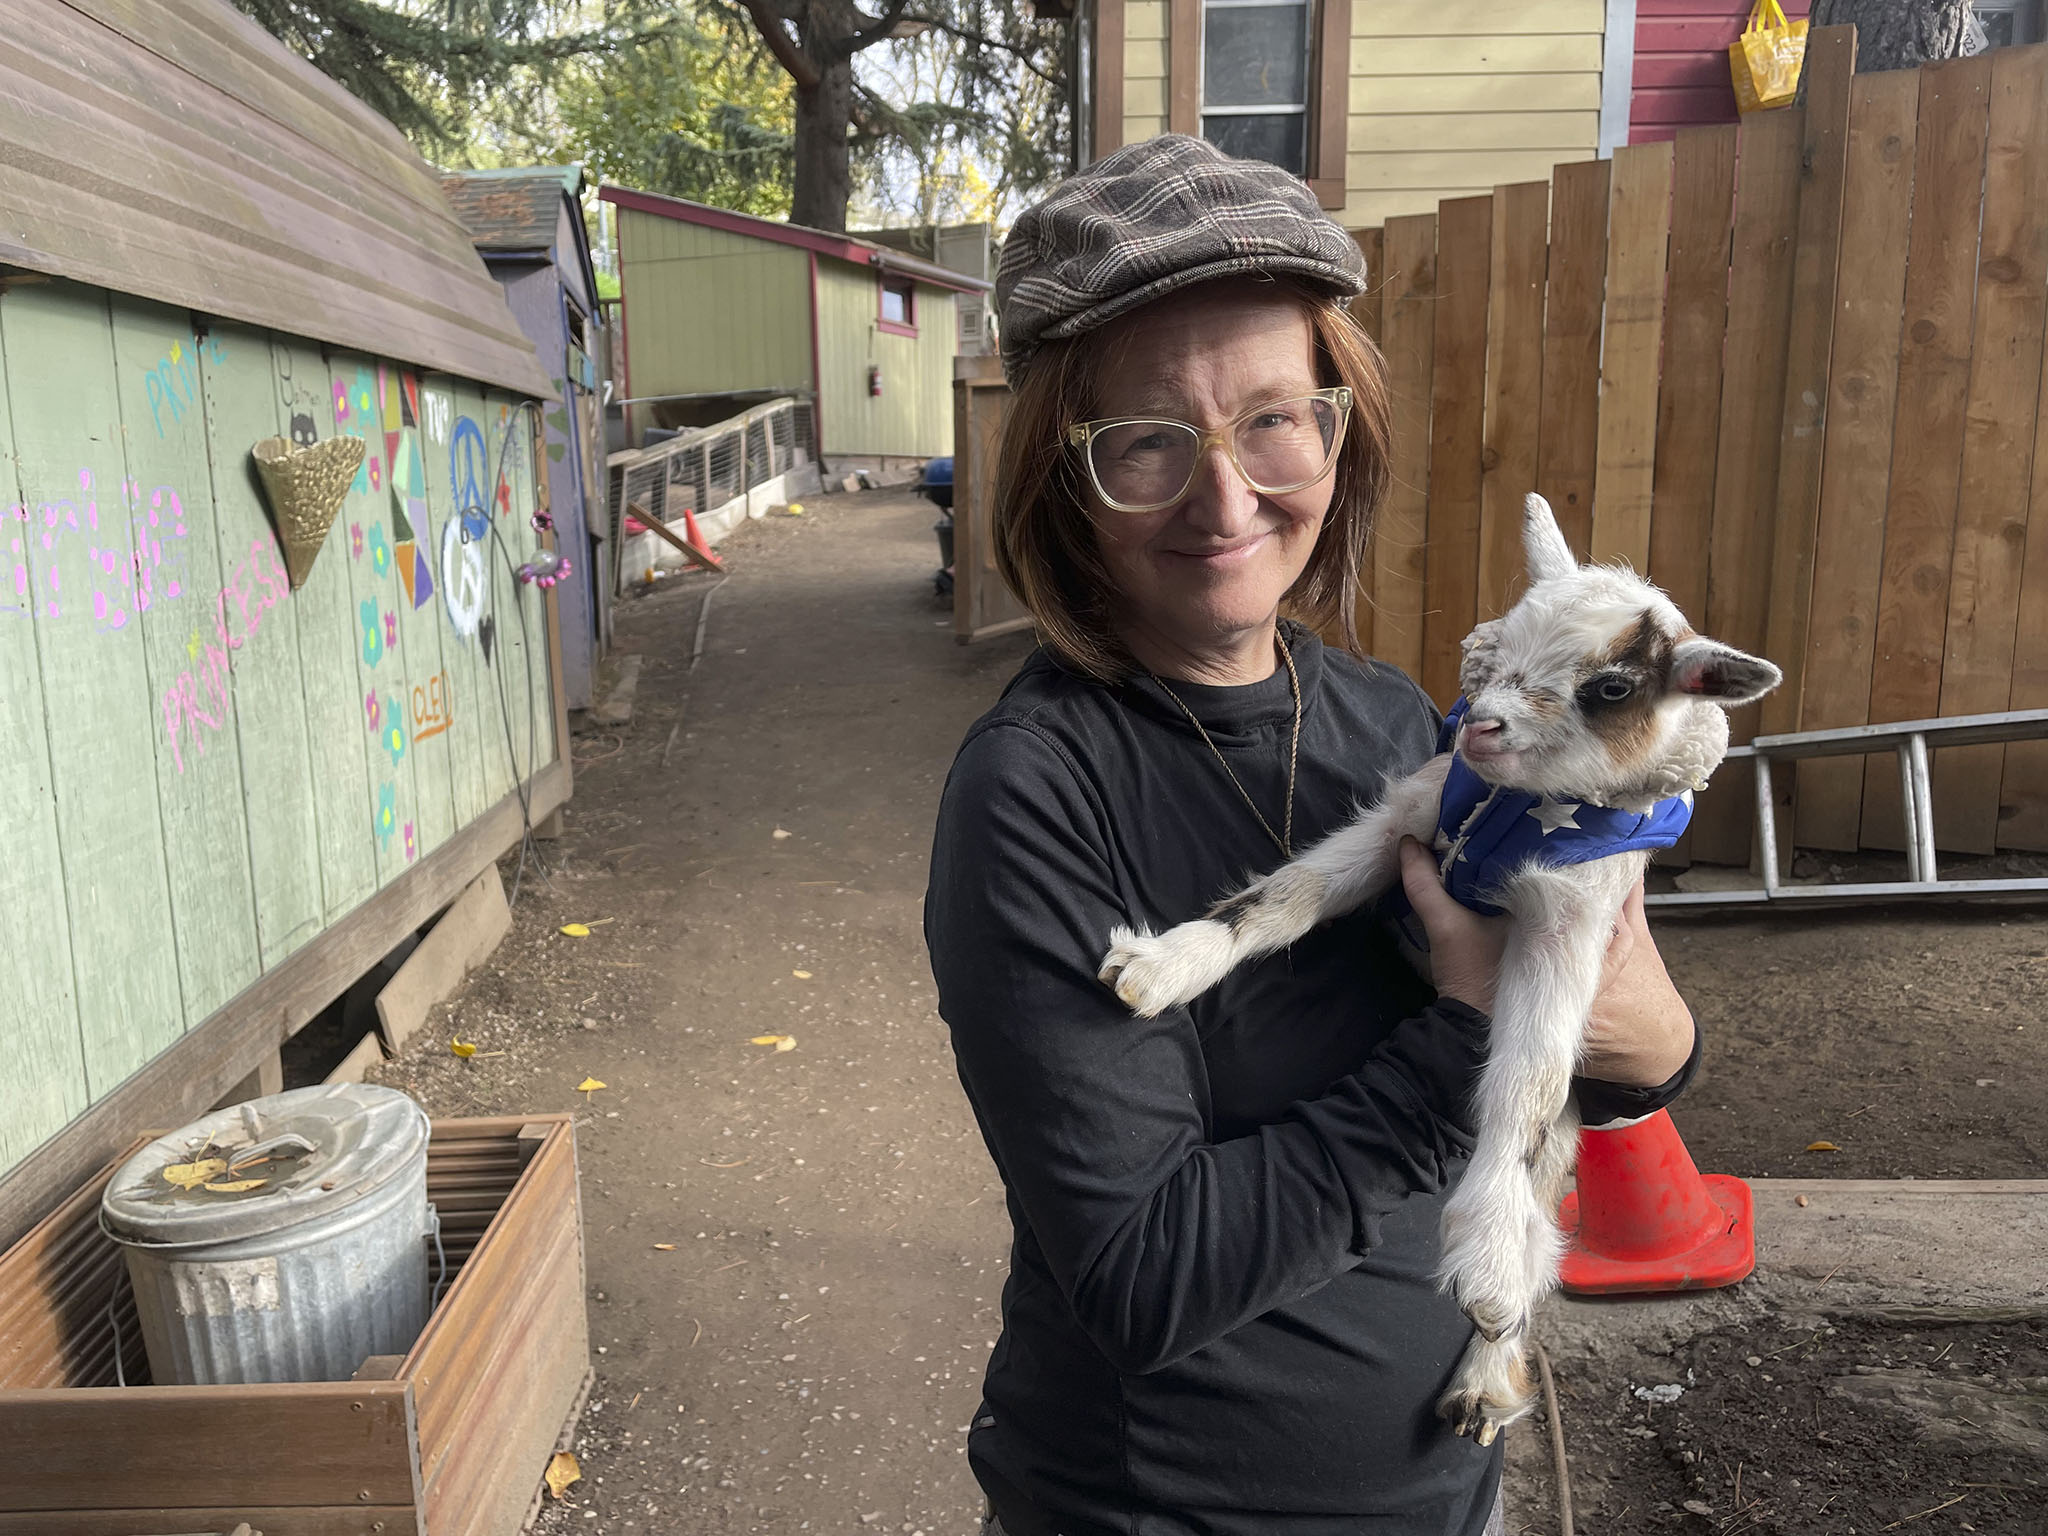 Barbra Weber holds a goat wearing a blue zip-up jacket for dogs. The rest of the neighborhood is visible in the background. 